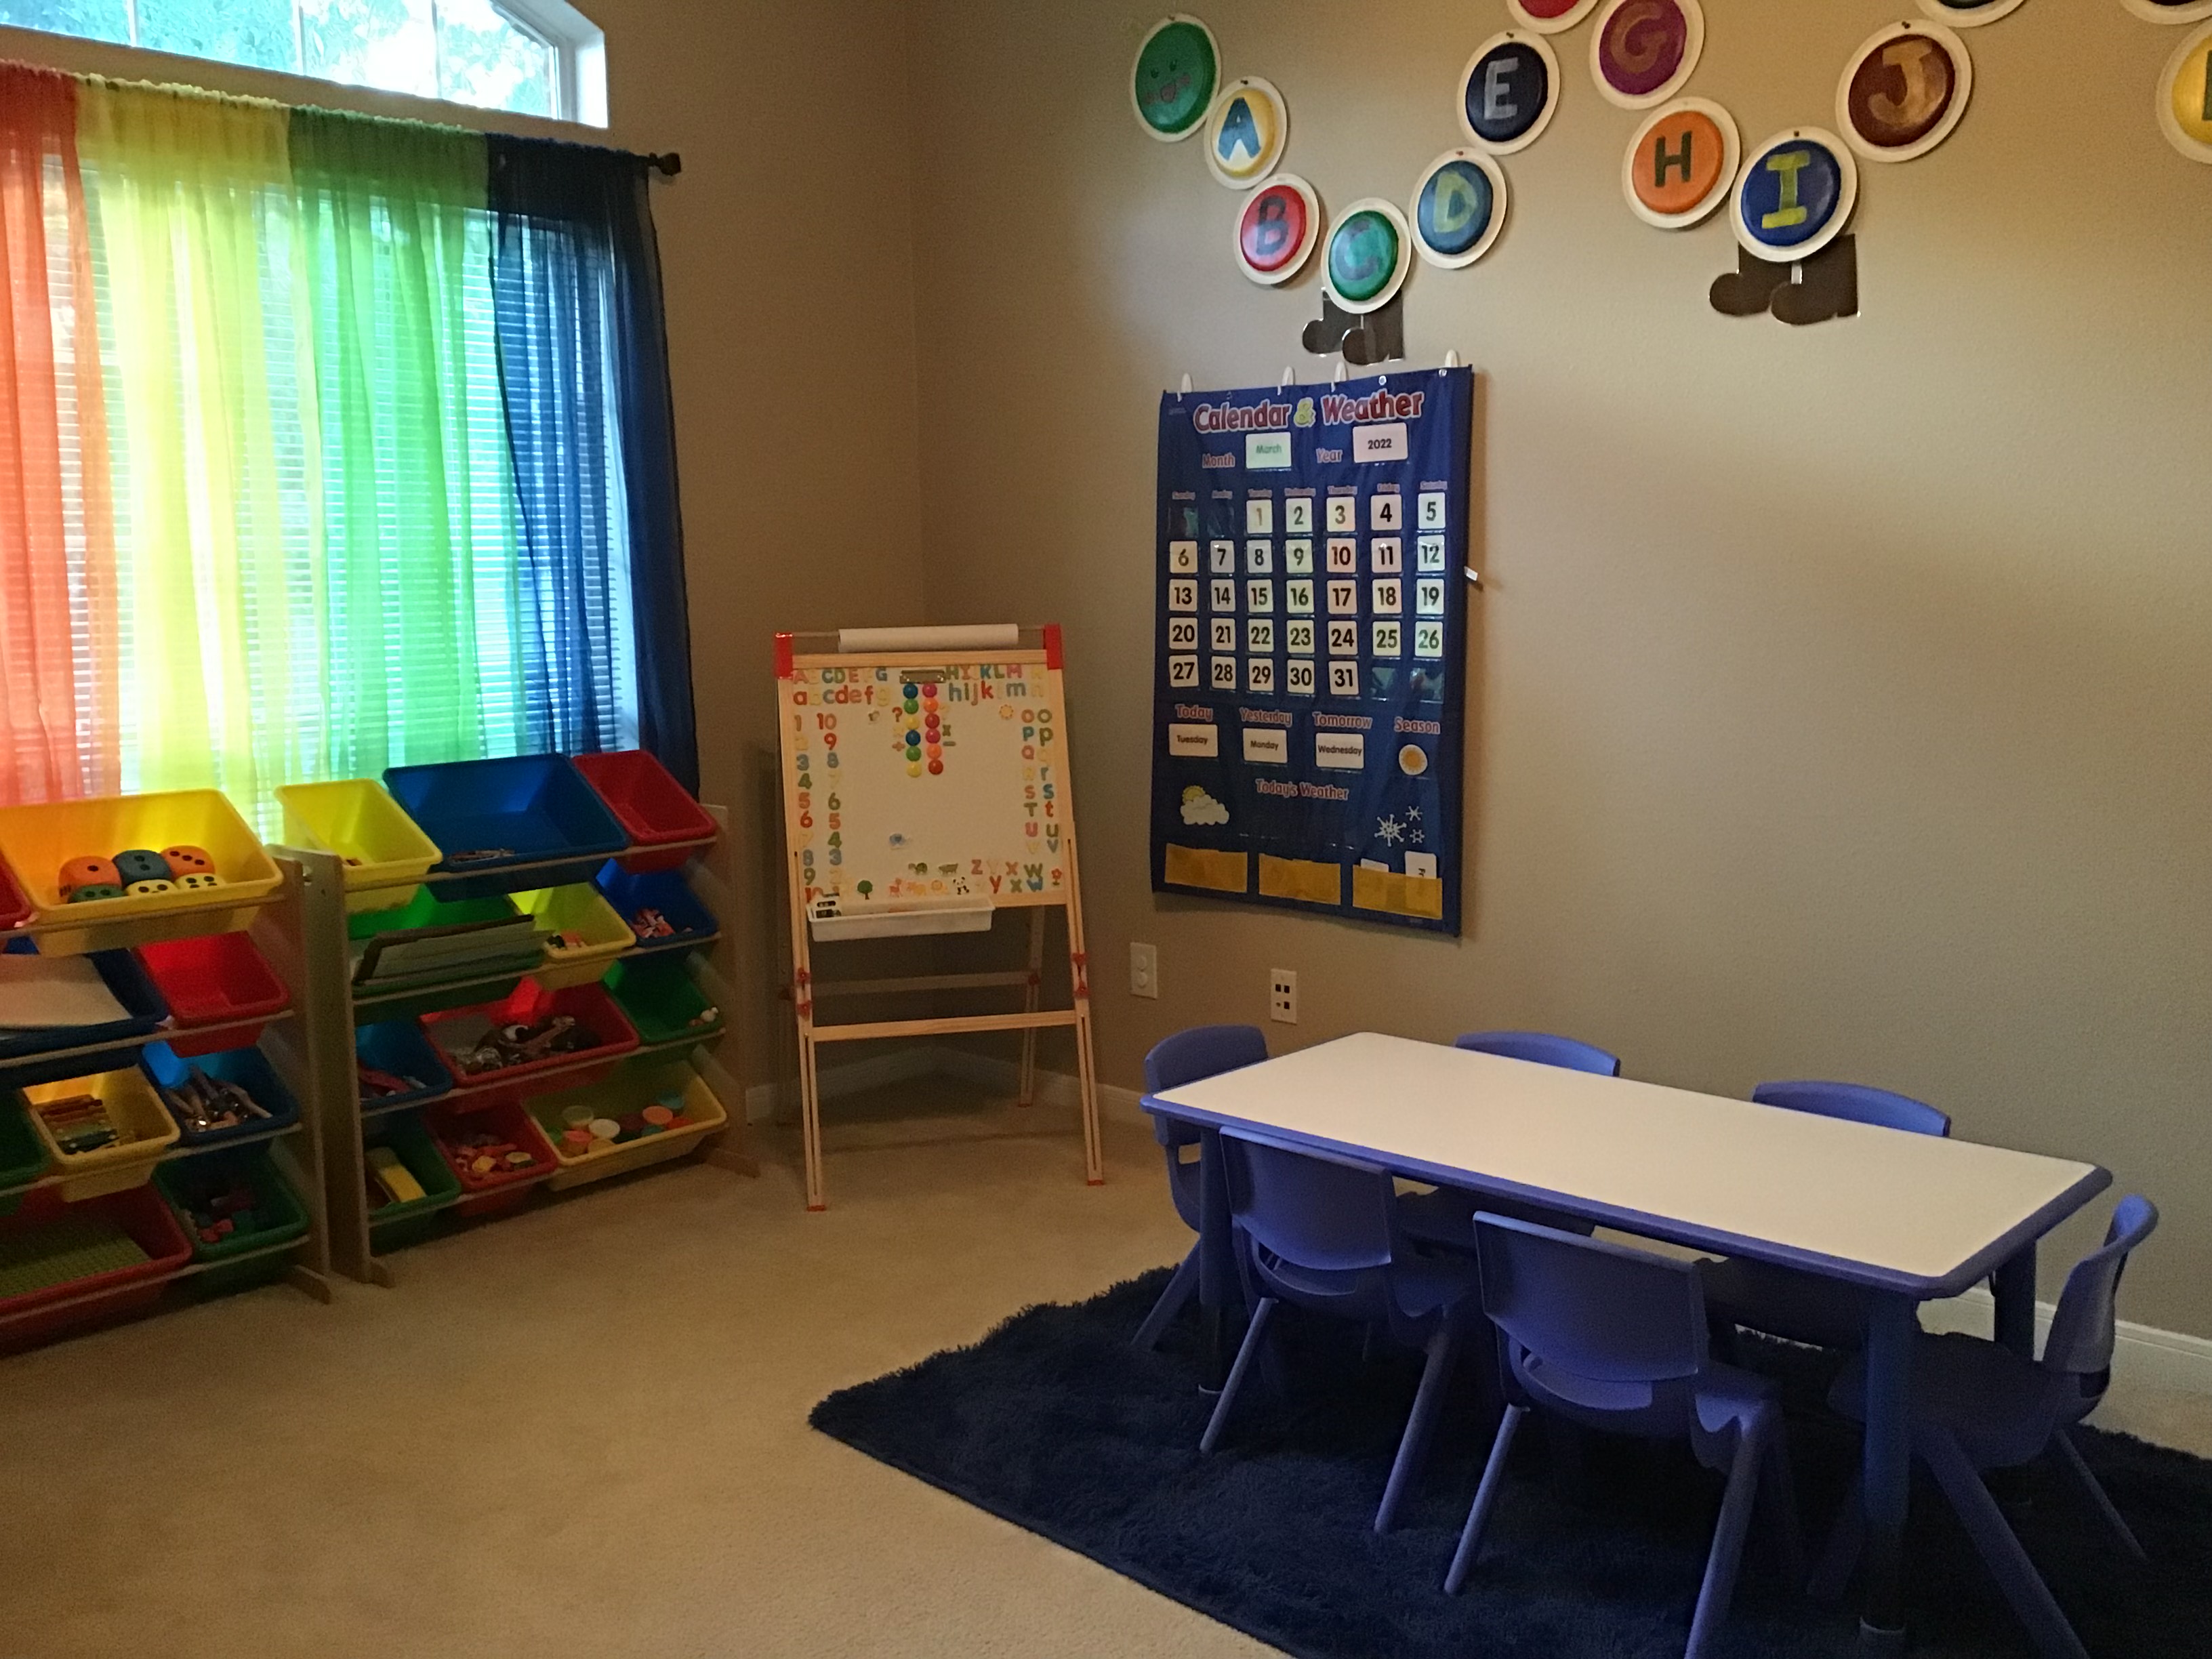 Image of a daycare room.